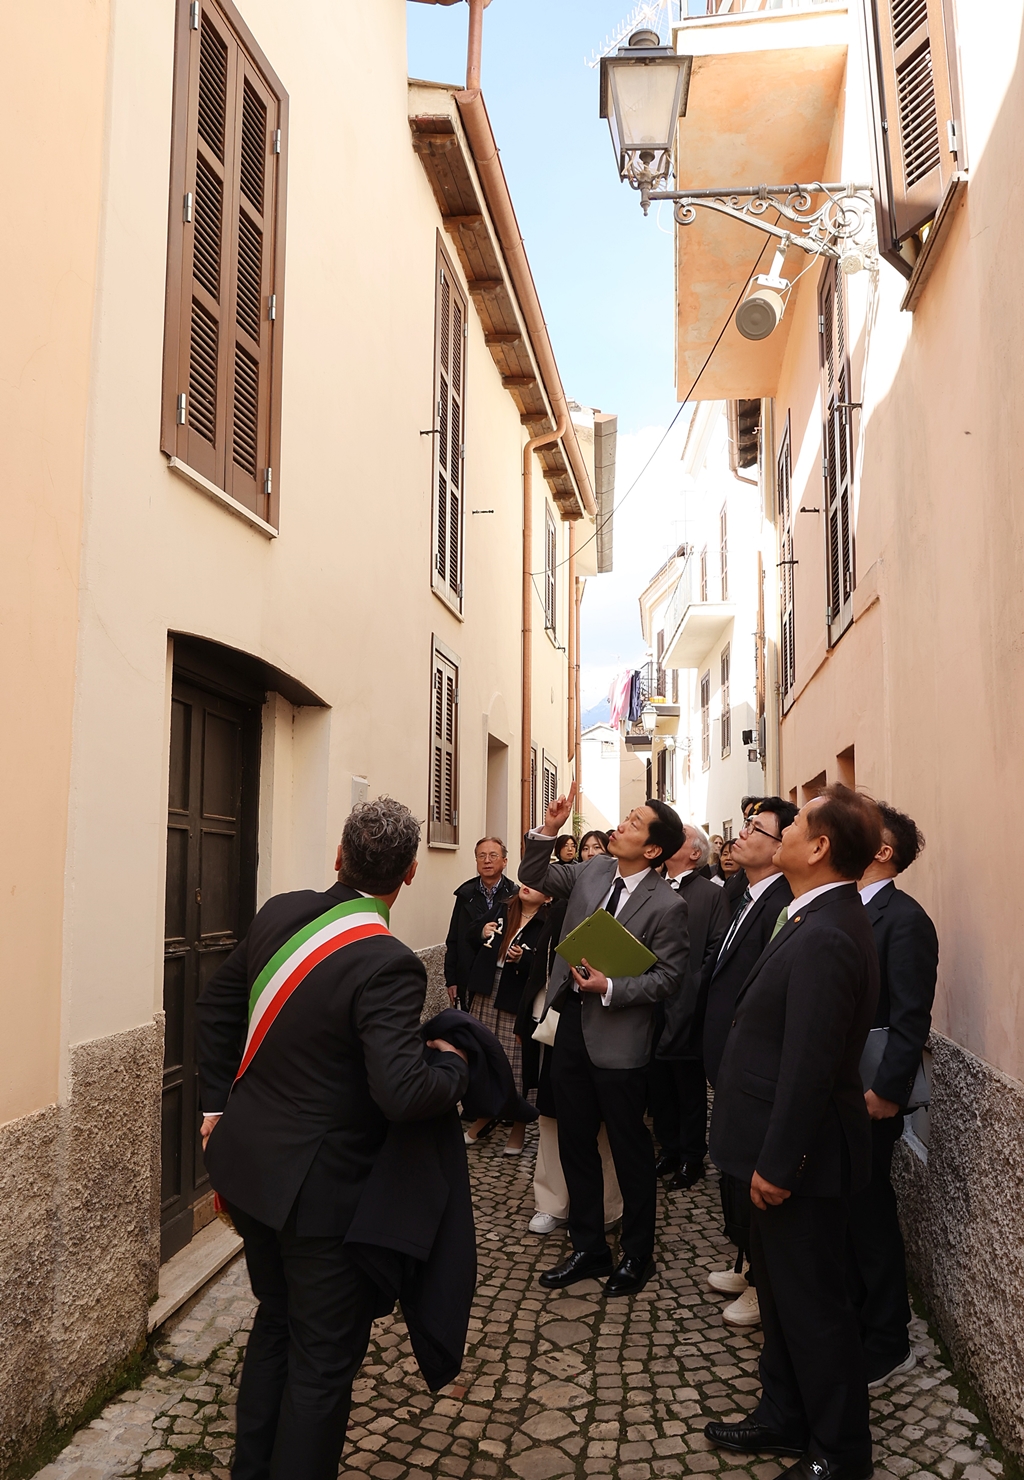 Minister of the Interior and Safety Lee Sang-min visits the city of Maenza in central Italy on the morning of March 8 (local time), guided by Mayor Claudio Sperduti to inspect the site of the '1 Euro Project', which aims to solve the problems of population outflow from and disappearance of local cities by renovating abandoned houses.